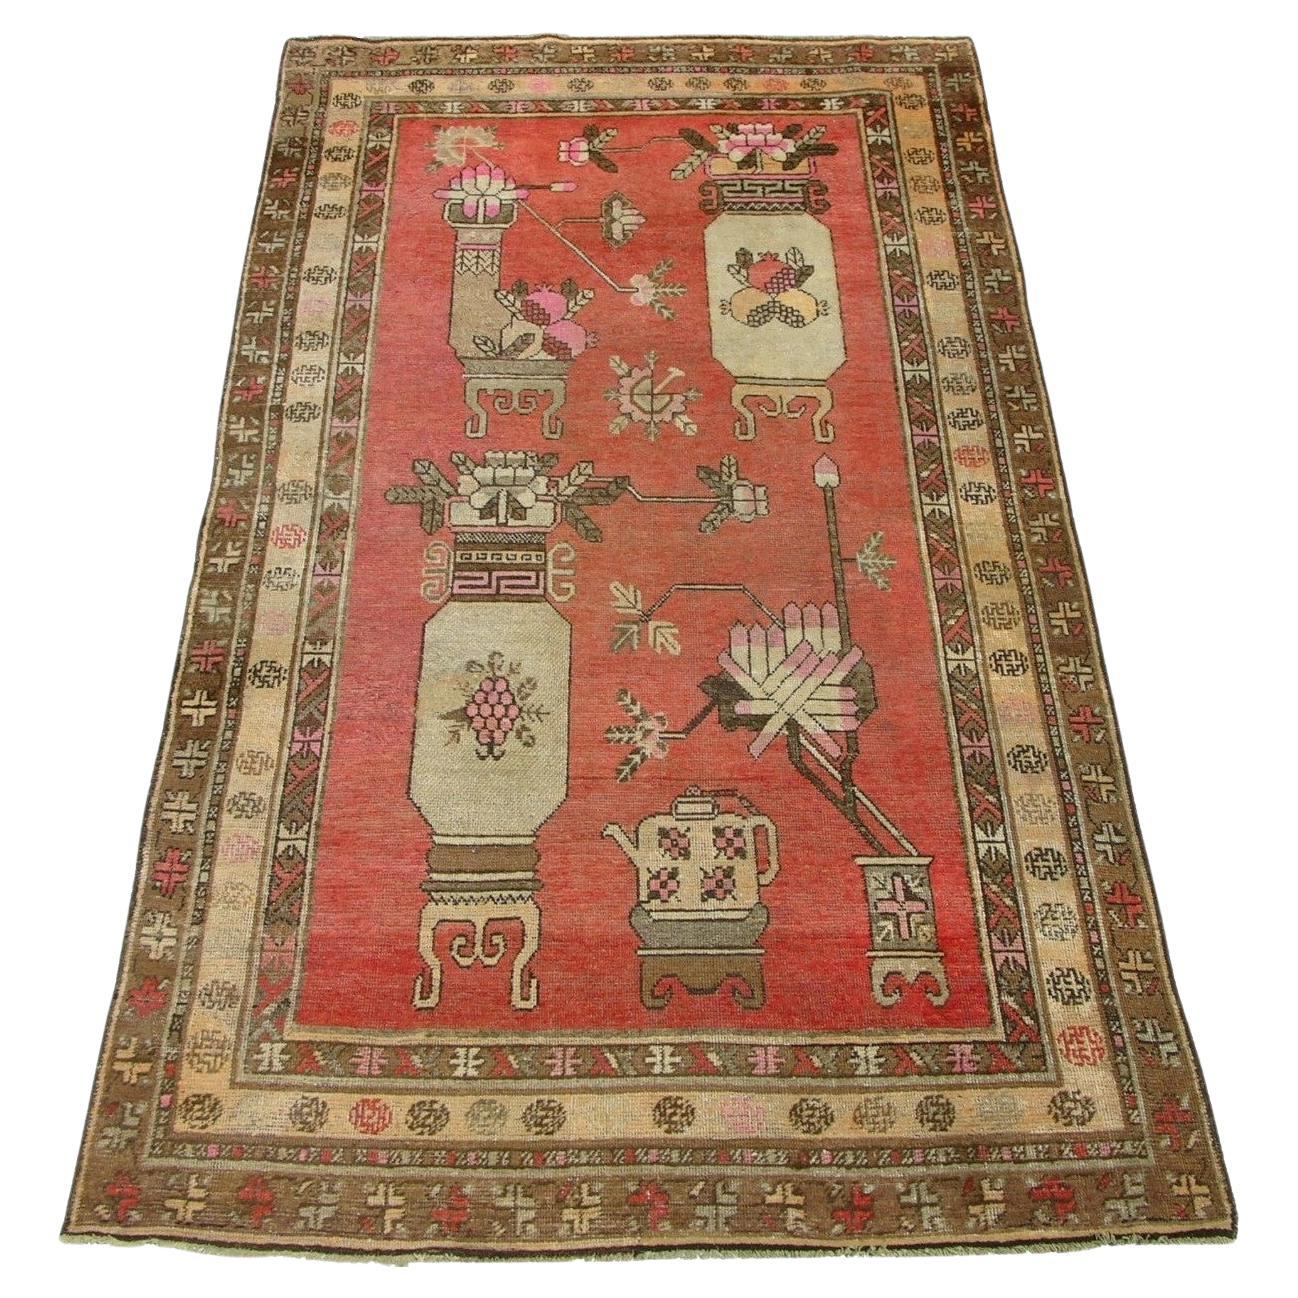 1900s Century Antique Samarkand Rug 9.11" X 5.2" For Sale